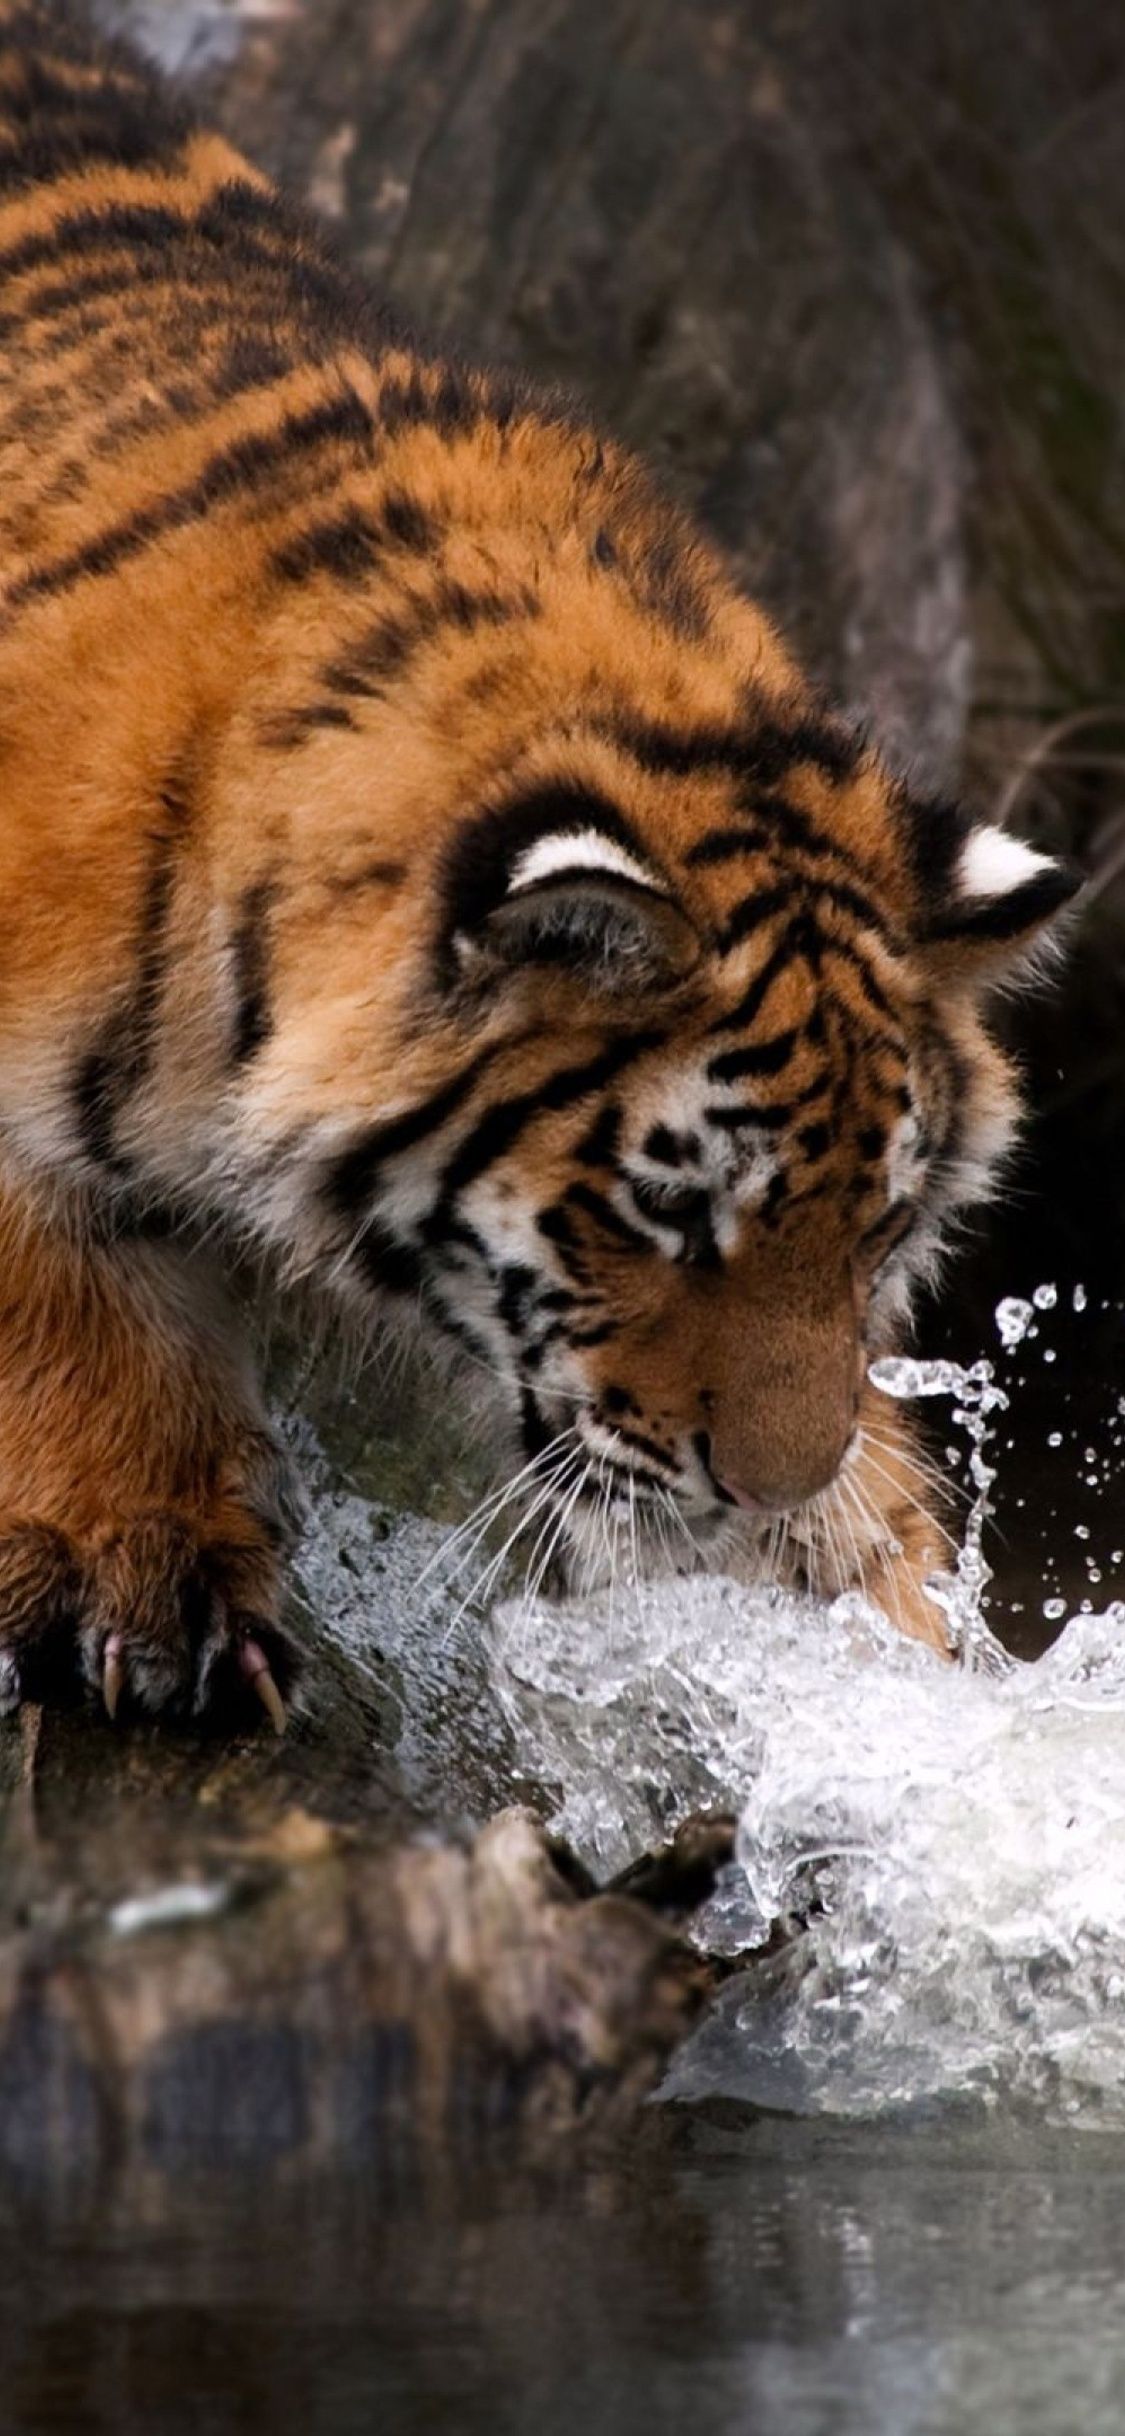 Tiger Water 4k iPhone XS, iPhone iPhone X HD 4k Wallpaper, Image, Background, Photo and Picture